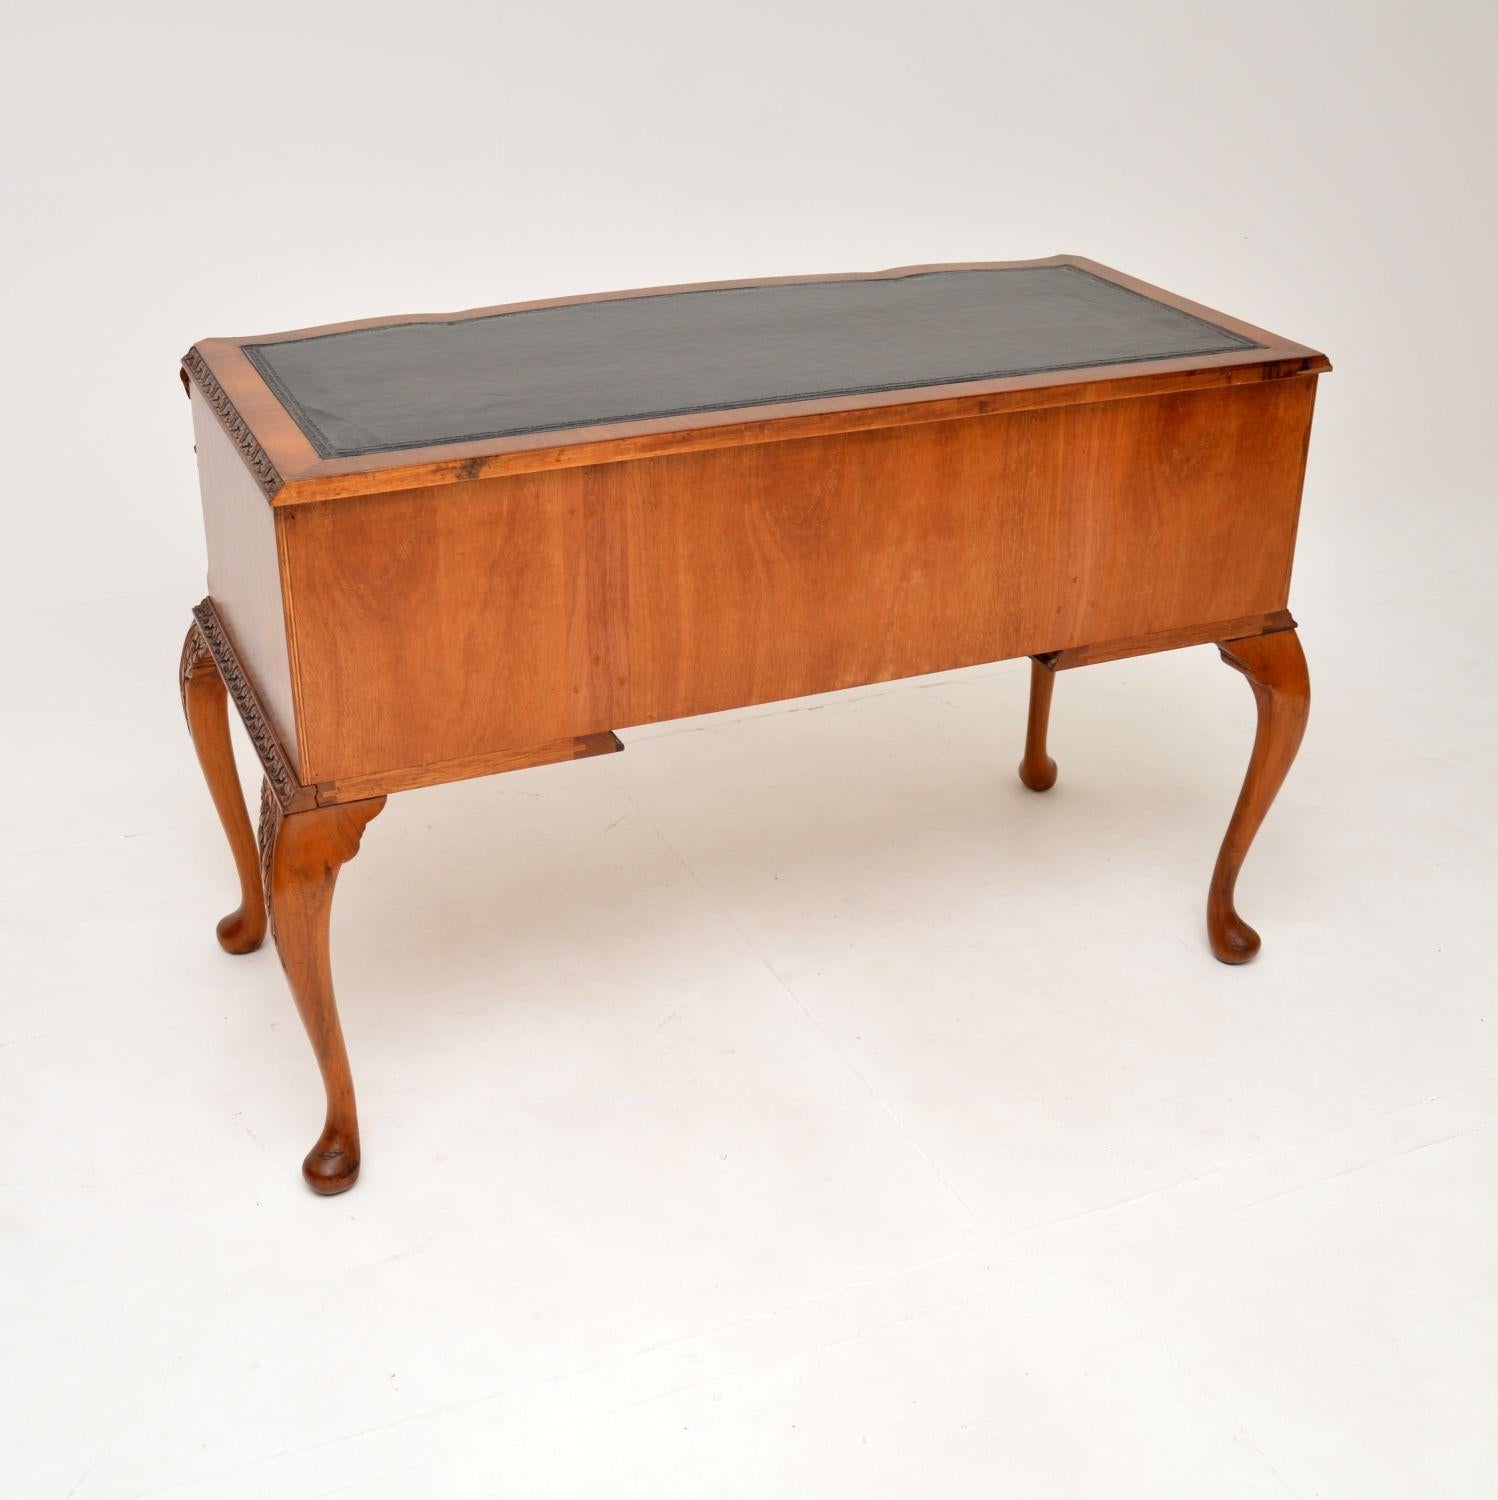 Early 20th Century Antique Burr Walnut Leather Top Writing Desk